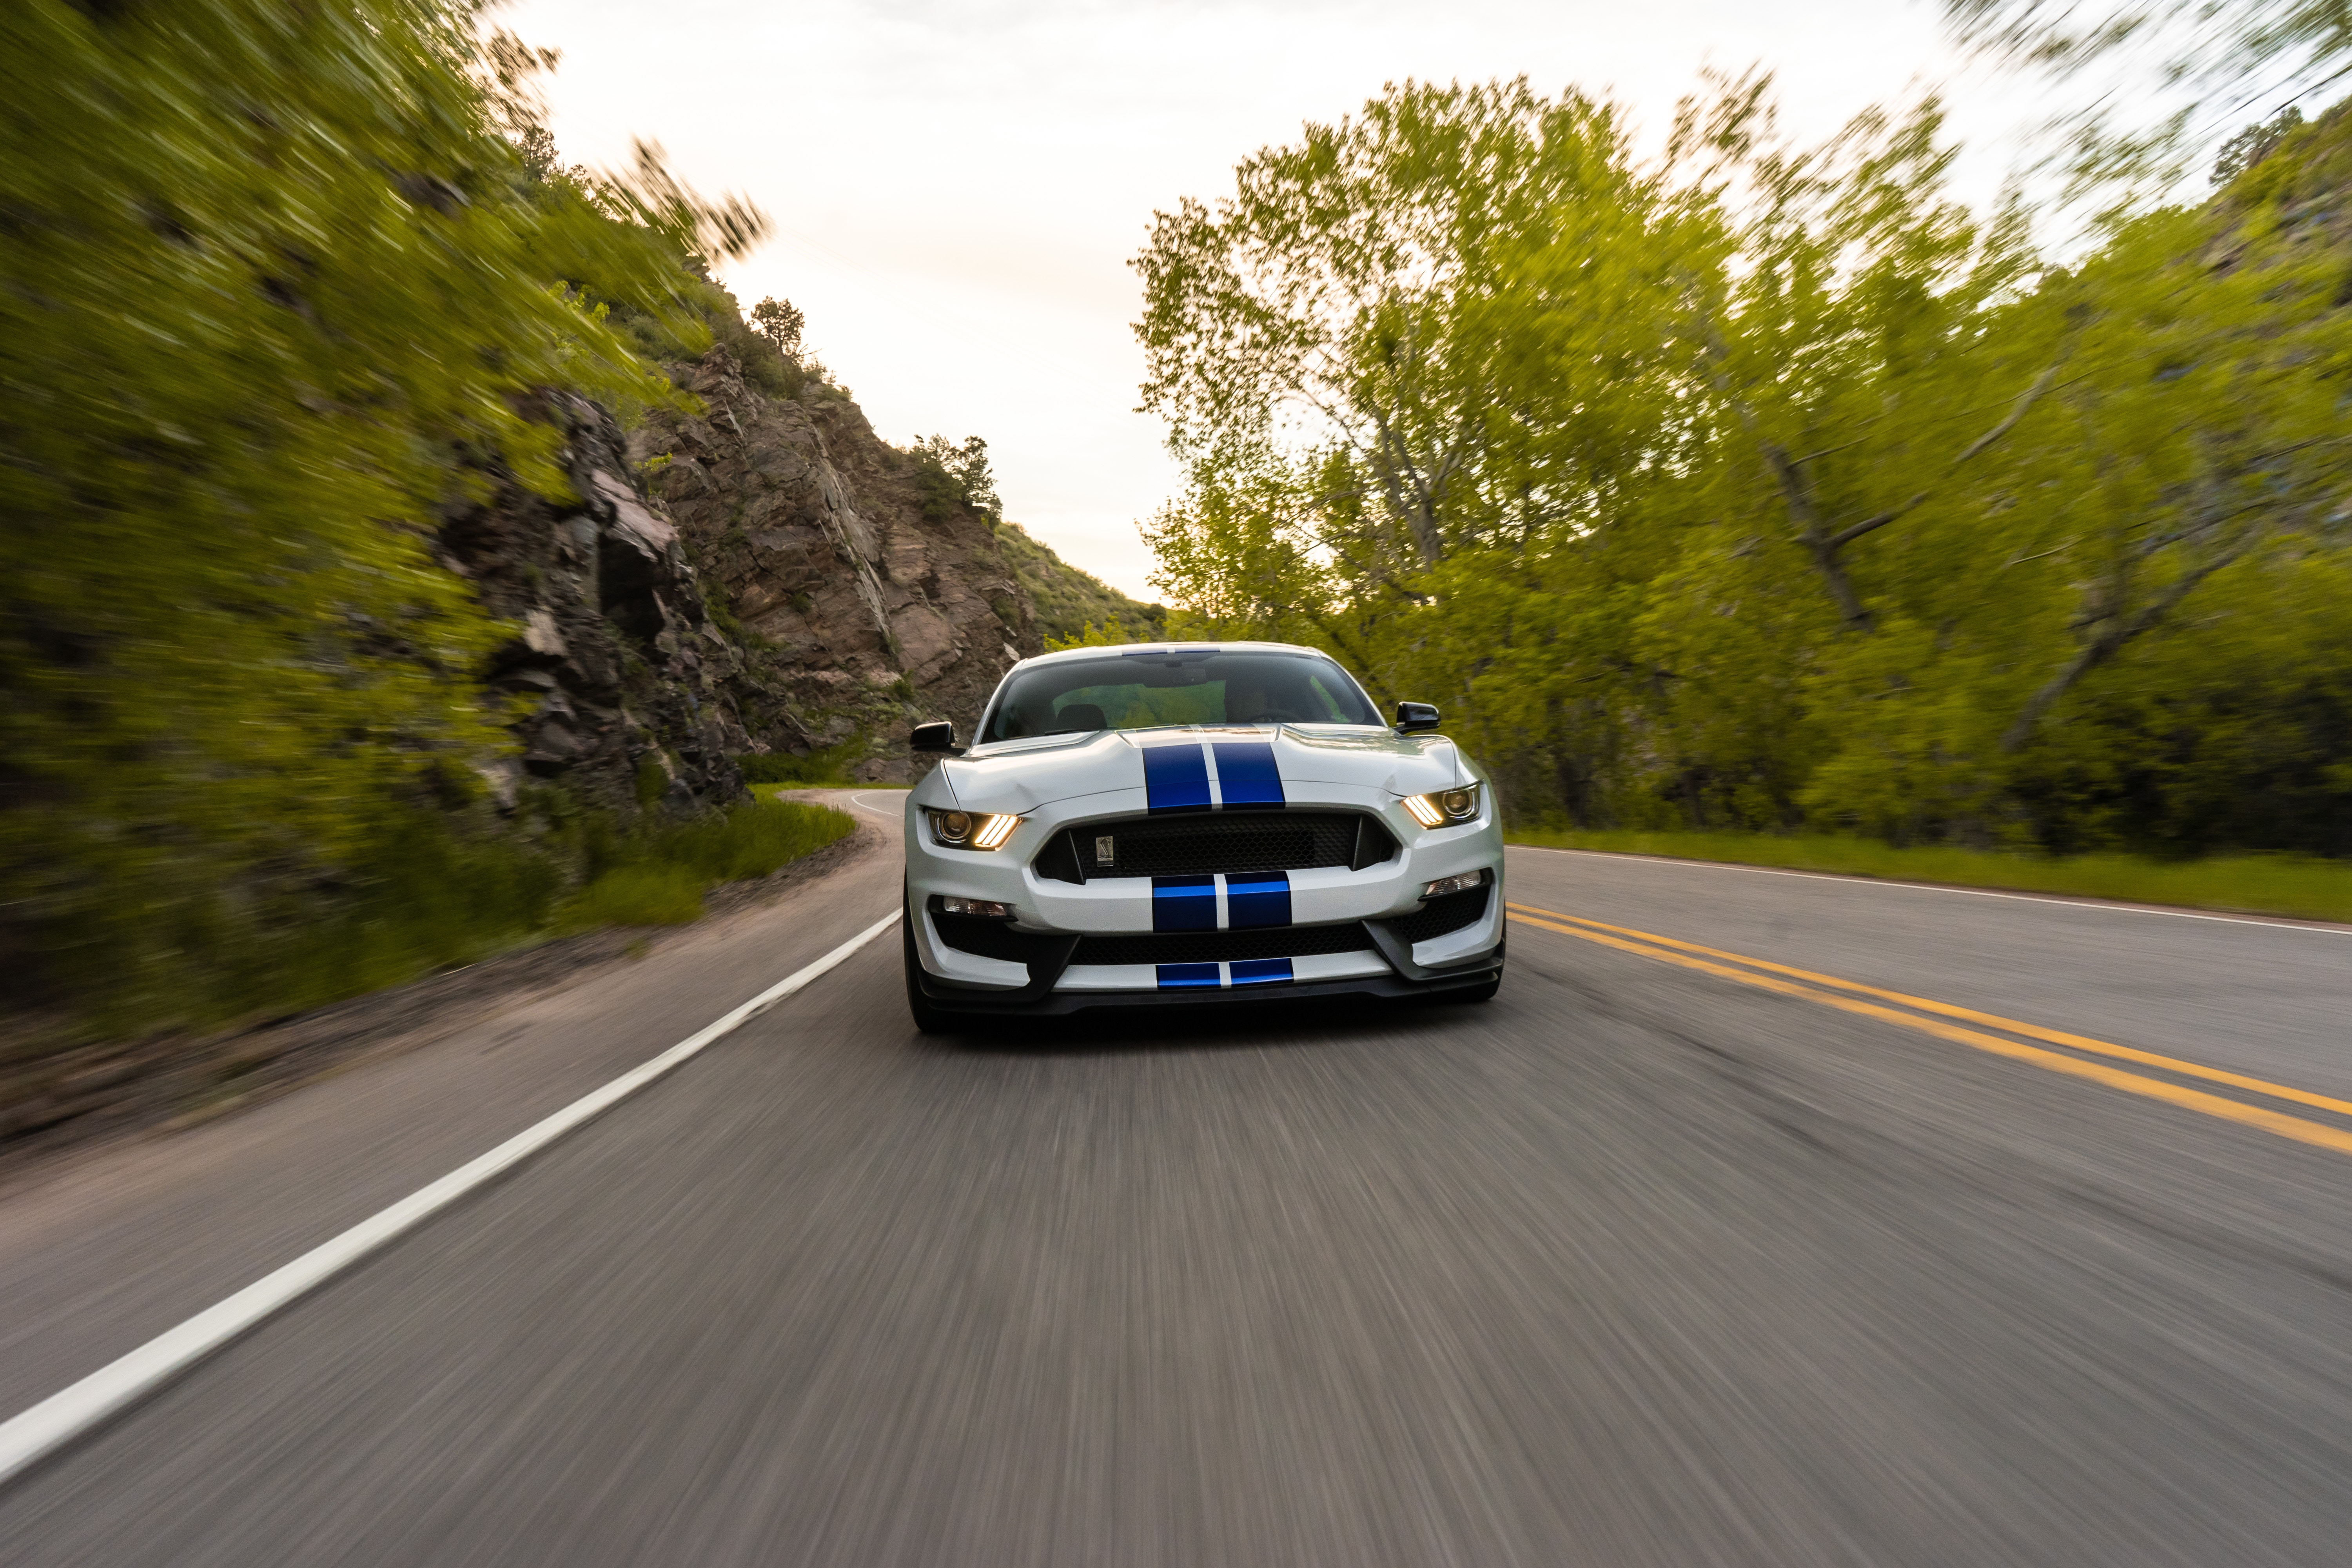 cars, sports car, ford mustang gt350, car, sports, ford, road, machine, speed 8K